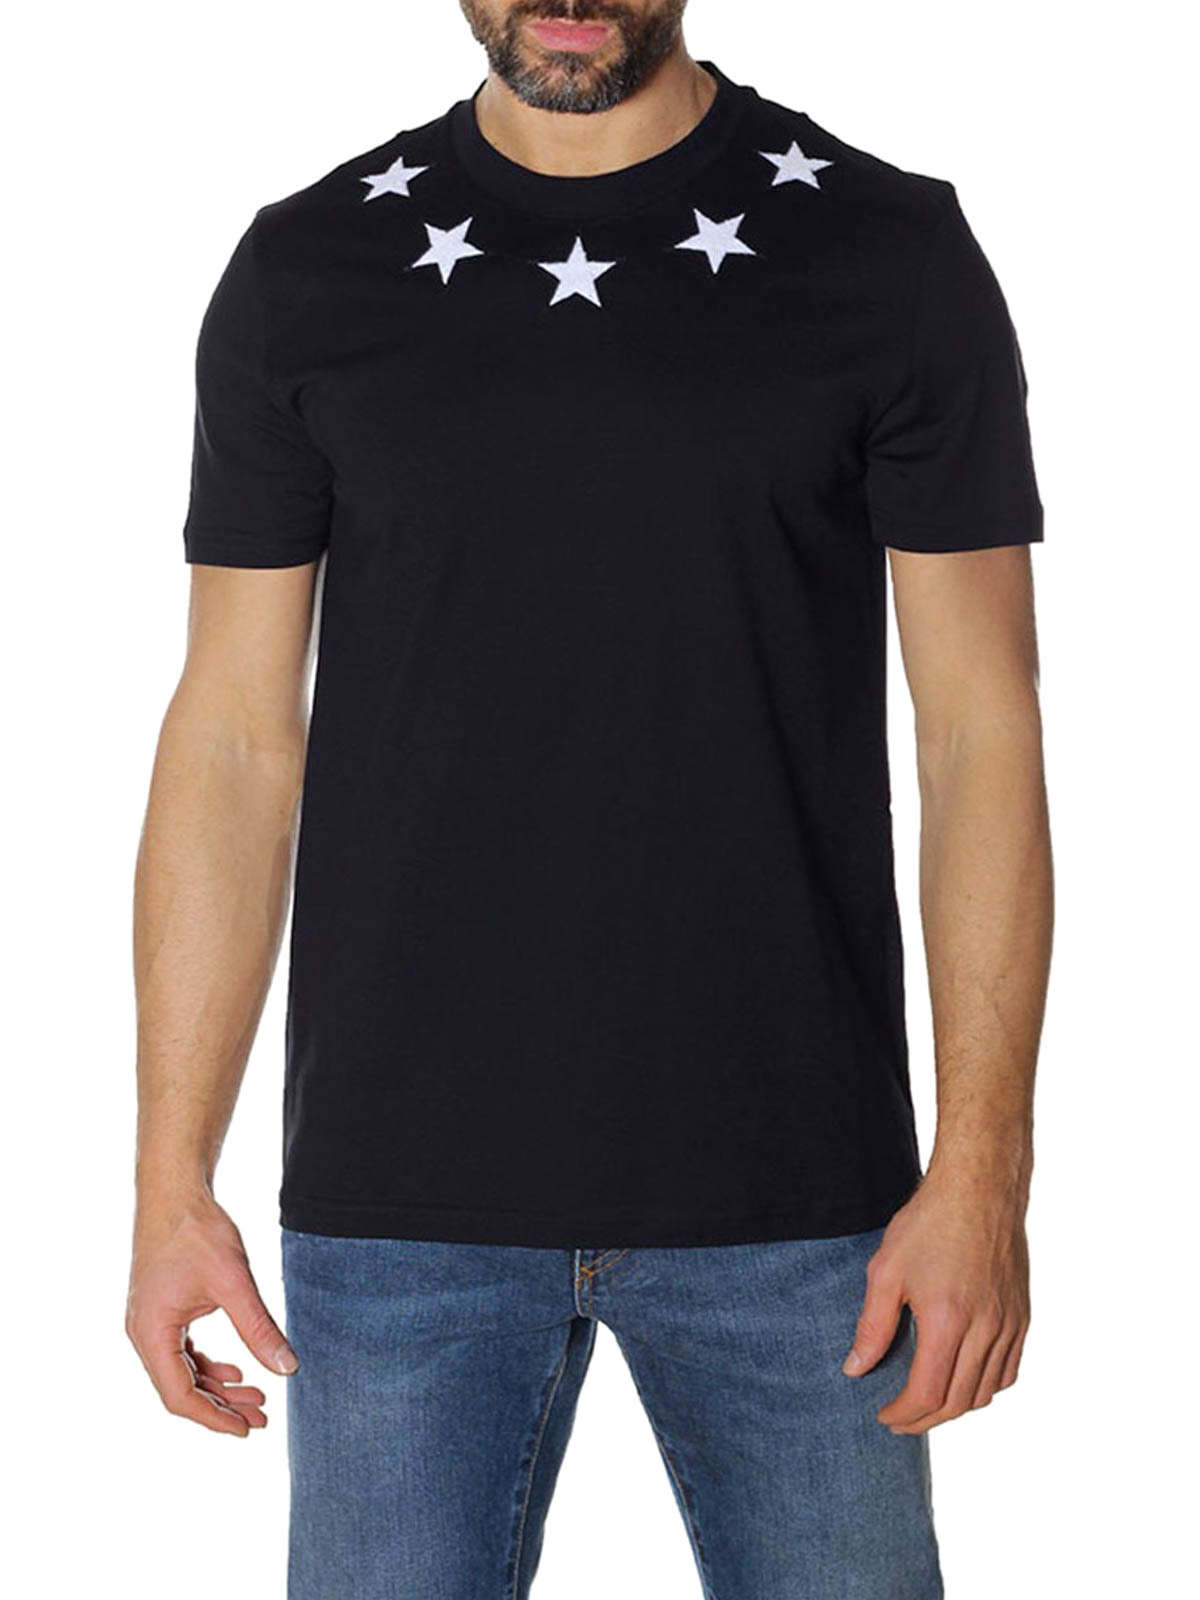 givenchy top stars